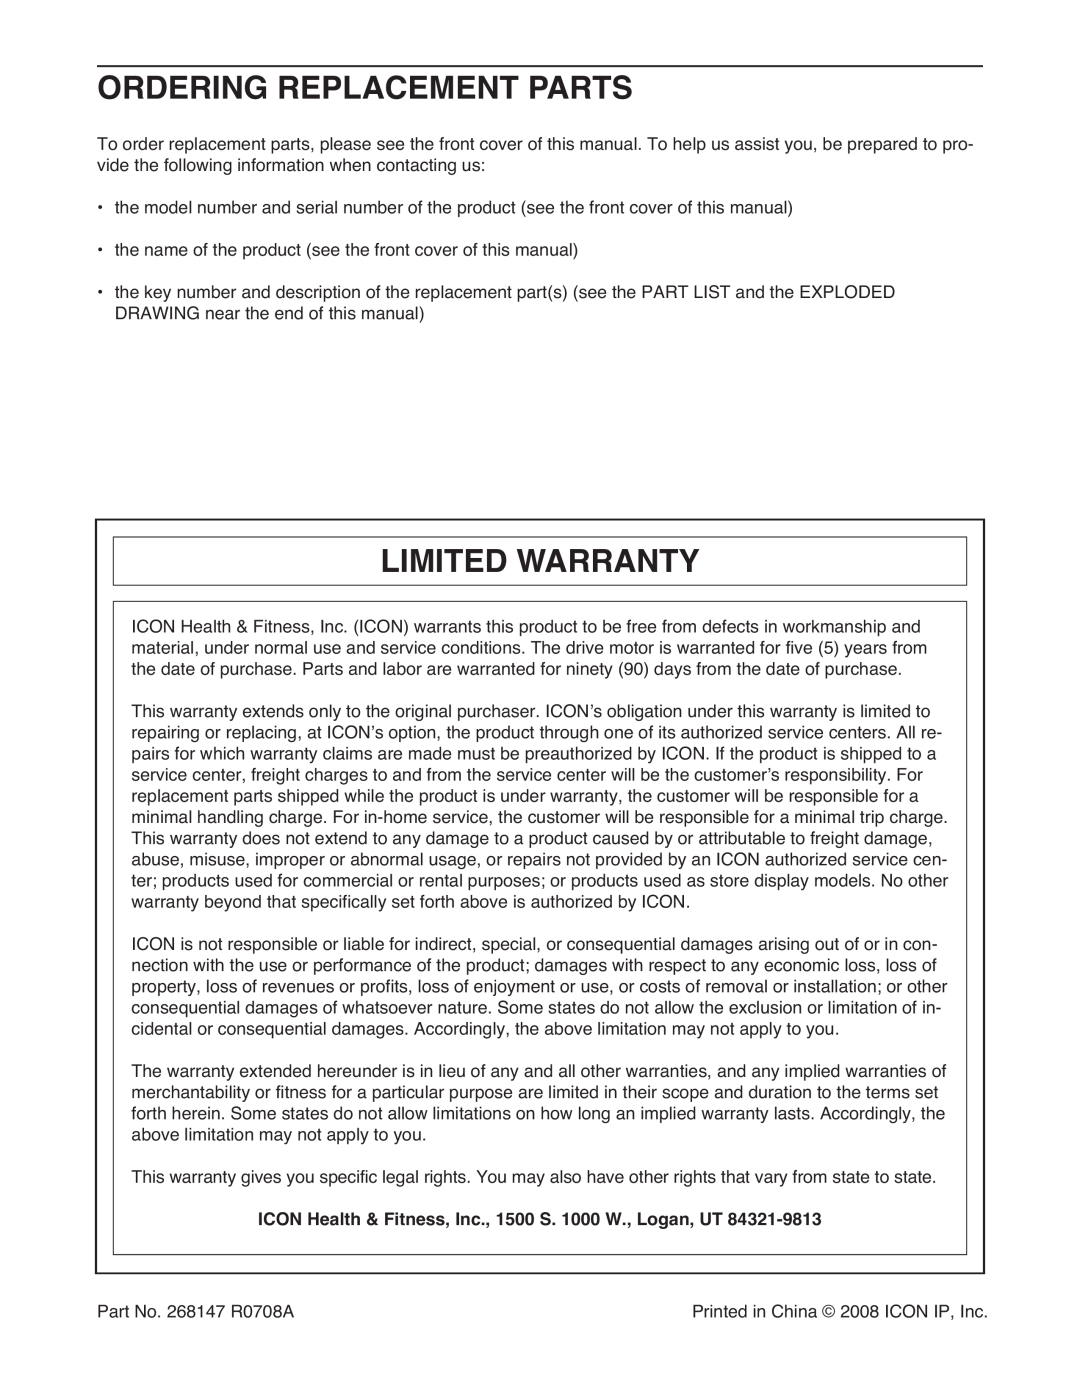 Gold's Gym GGTL03607.3 manual Ordering Replacement Parts, Limited Warranty 